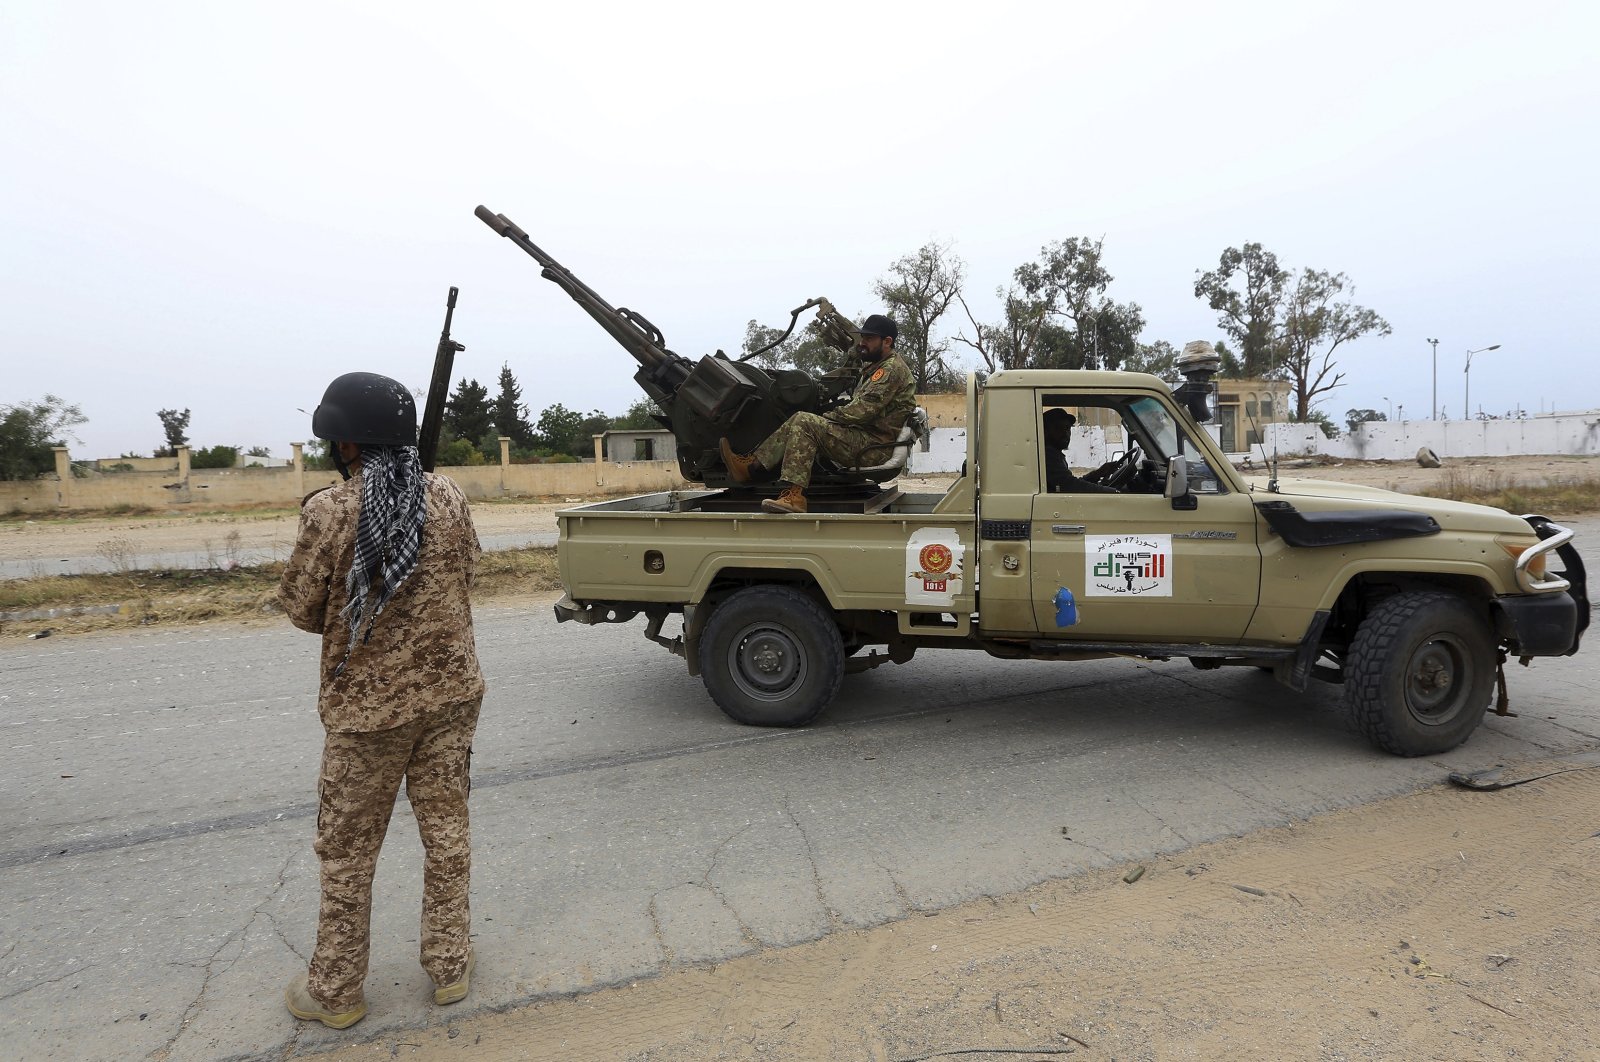 Libyan Army forces clash with putschist Gen. Haftar's militias, south of the capital Tripoli, Libya, May 19, 2019. (AP Photo)